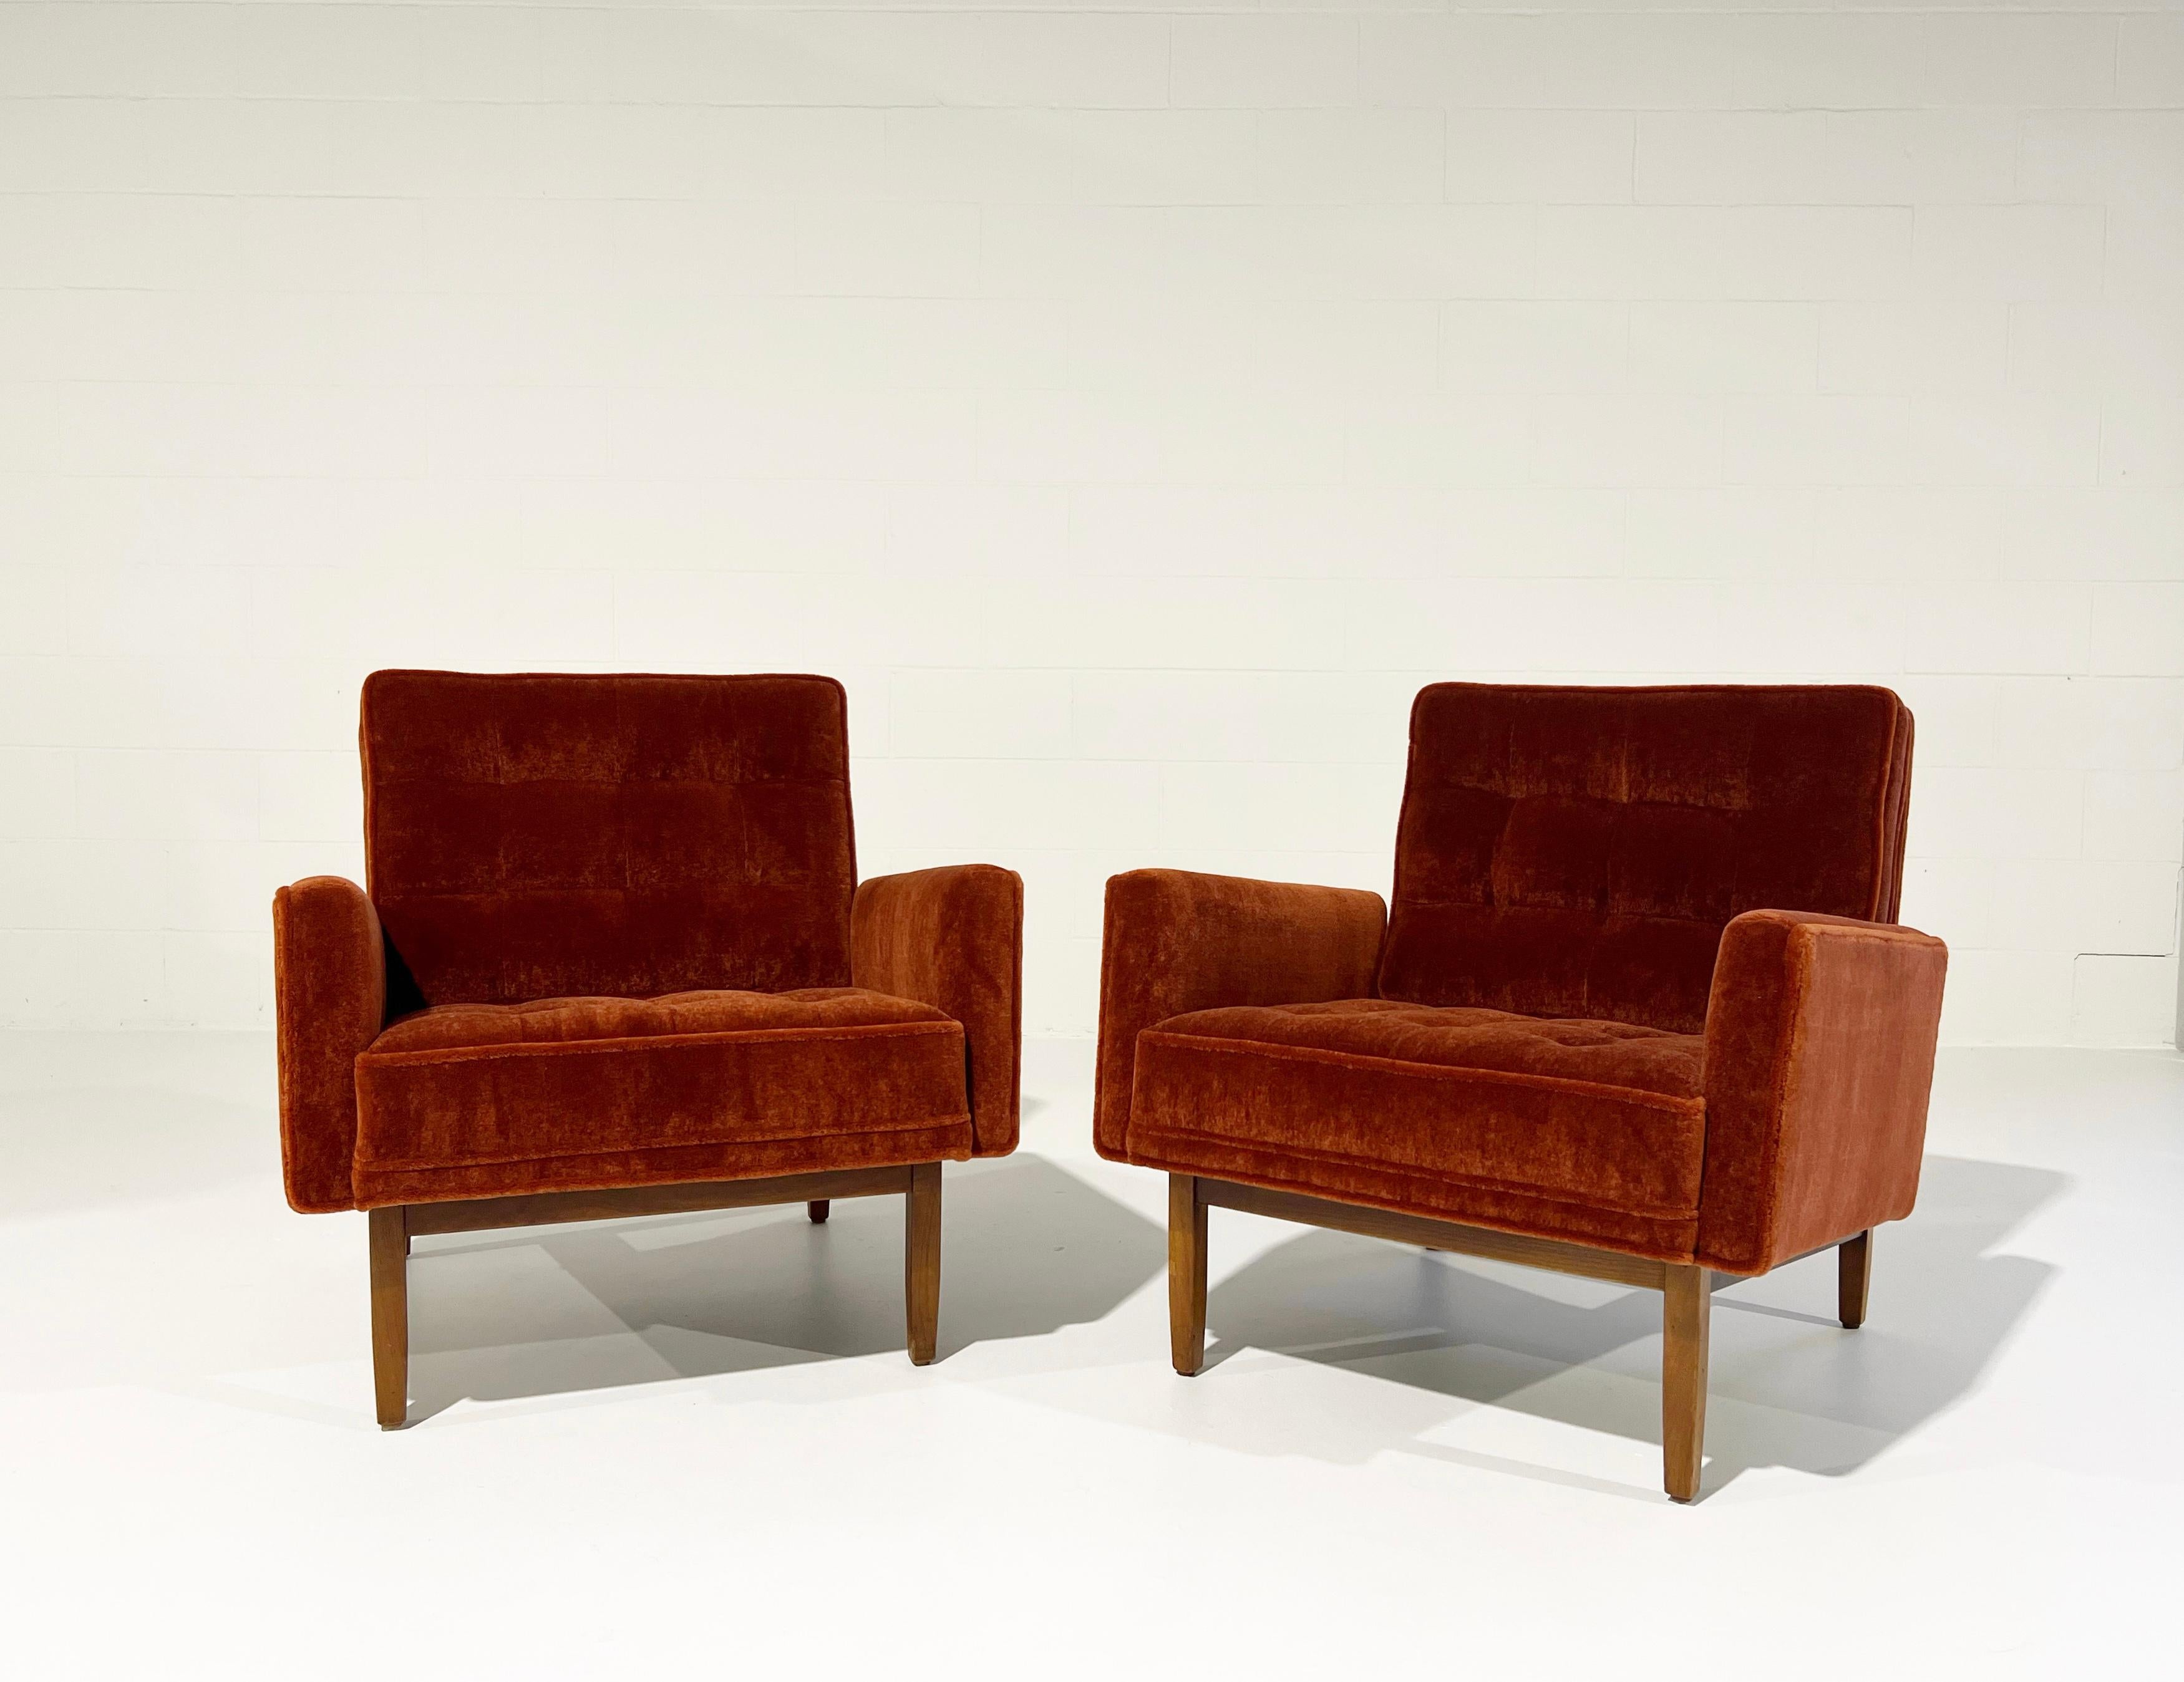 Vintage Restored Florence Knoll Armchairs in Pierre Frey Teddy Mohair For Sale 3